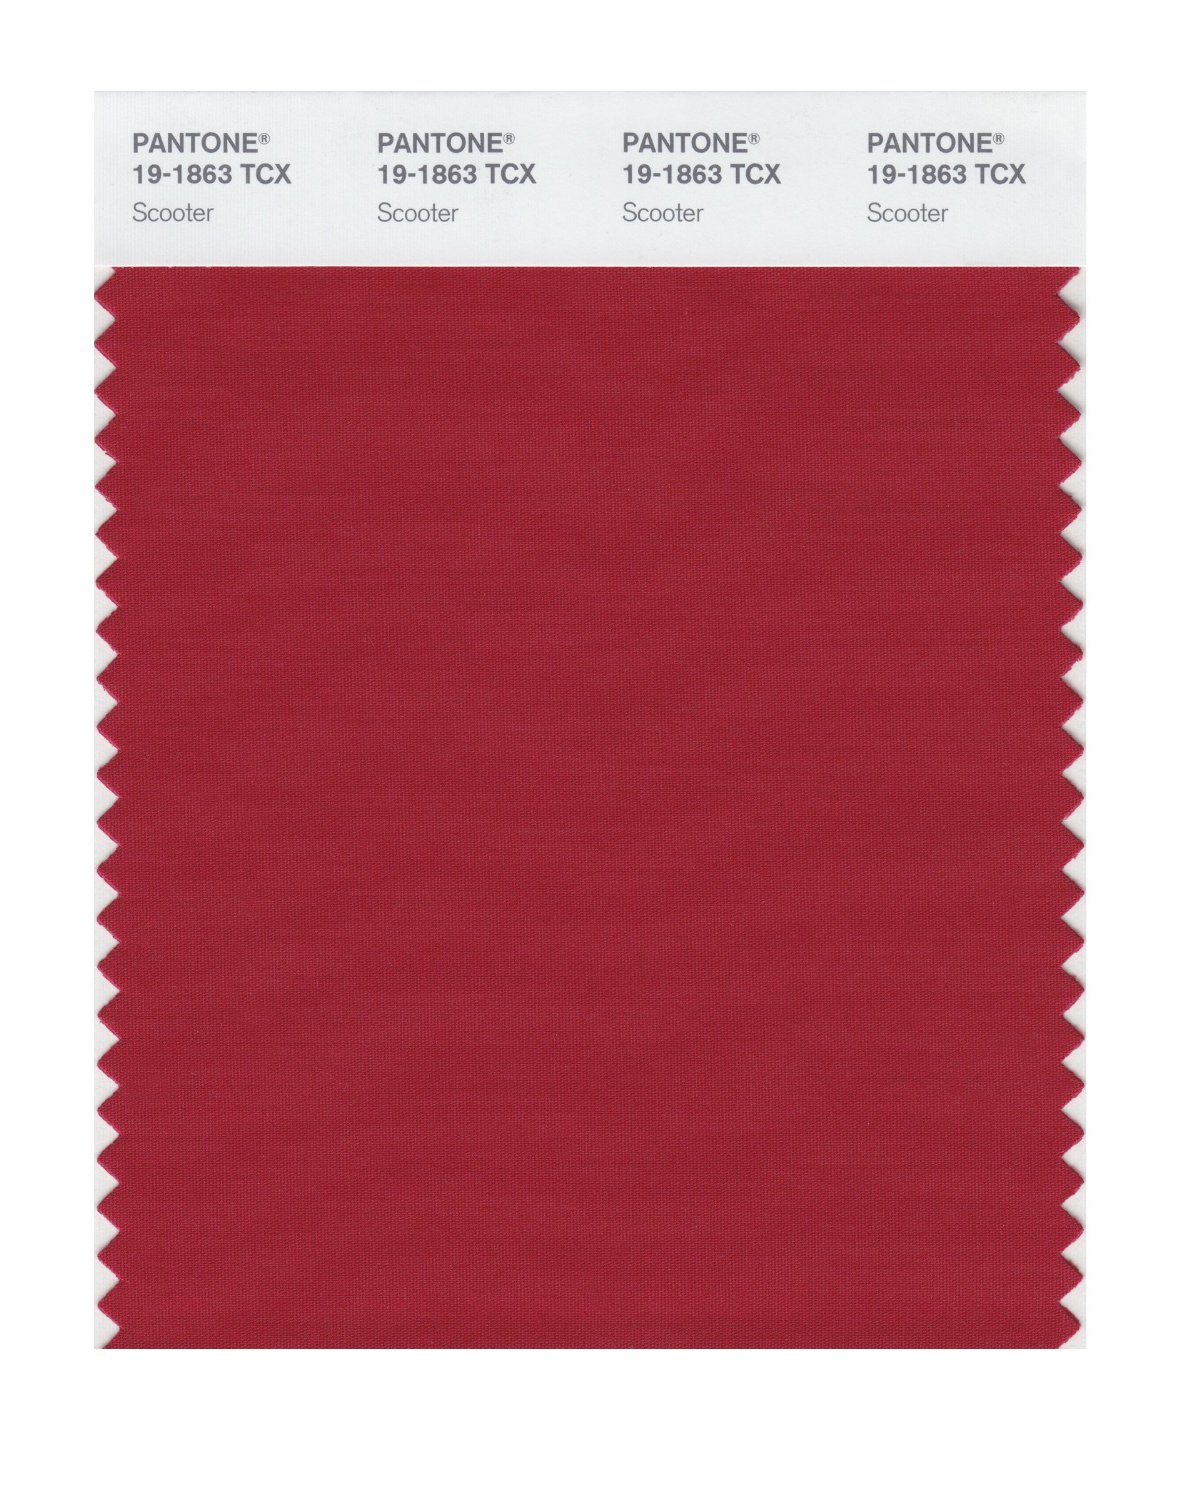 Pantone Cotton Swatch 19-1863 Scooter